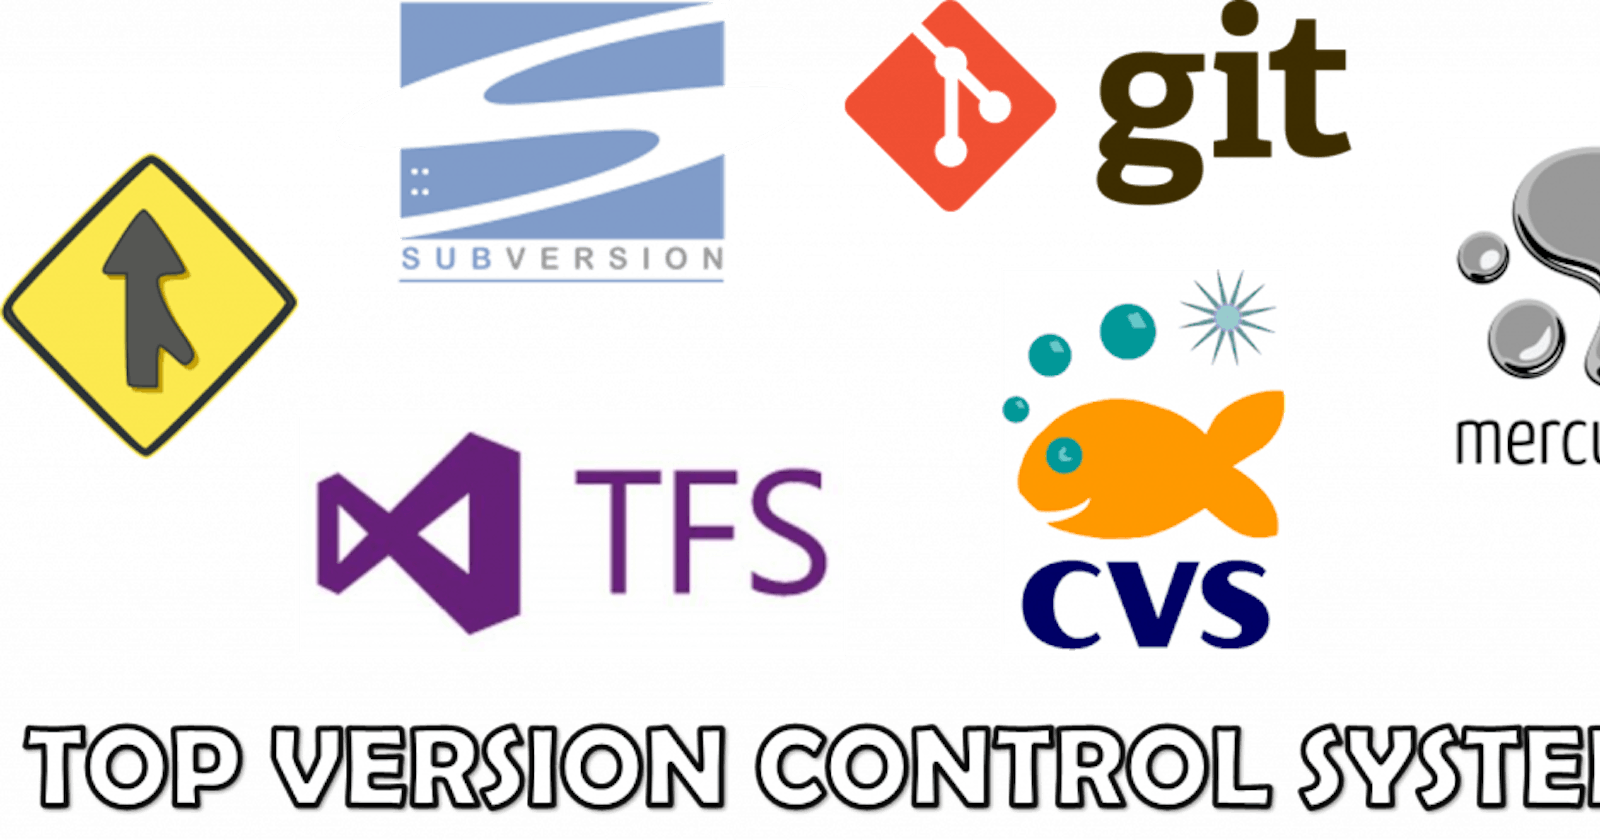 Version control and source control system simplified